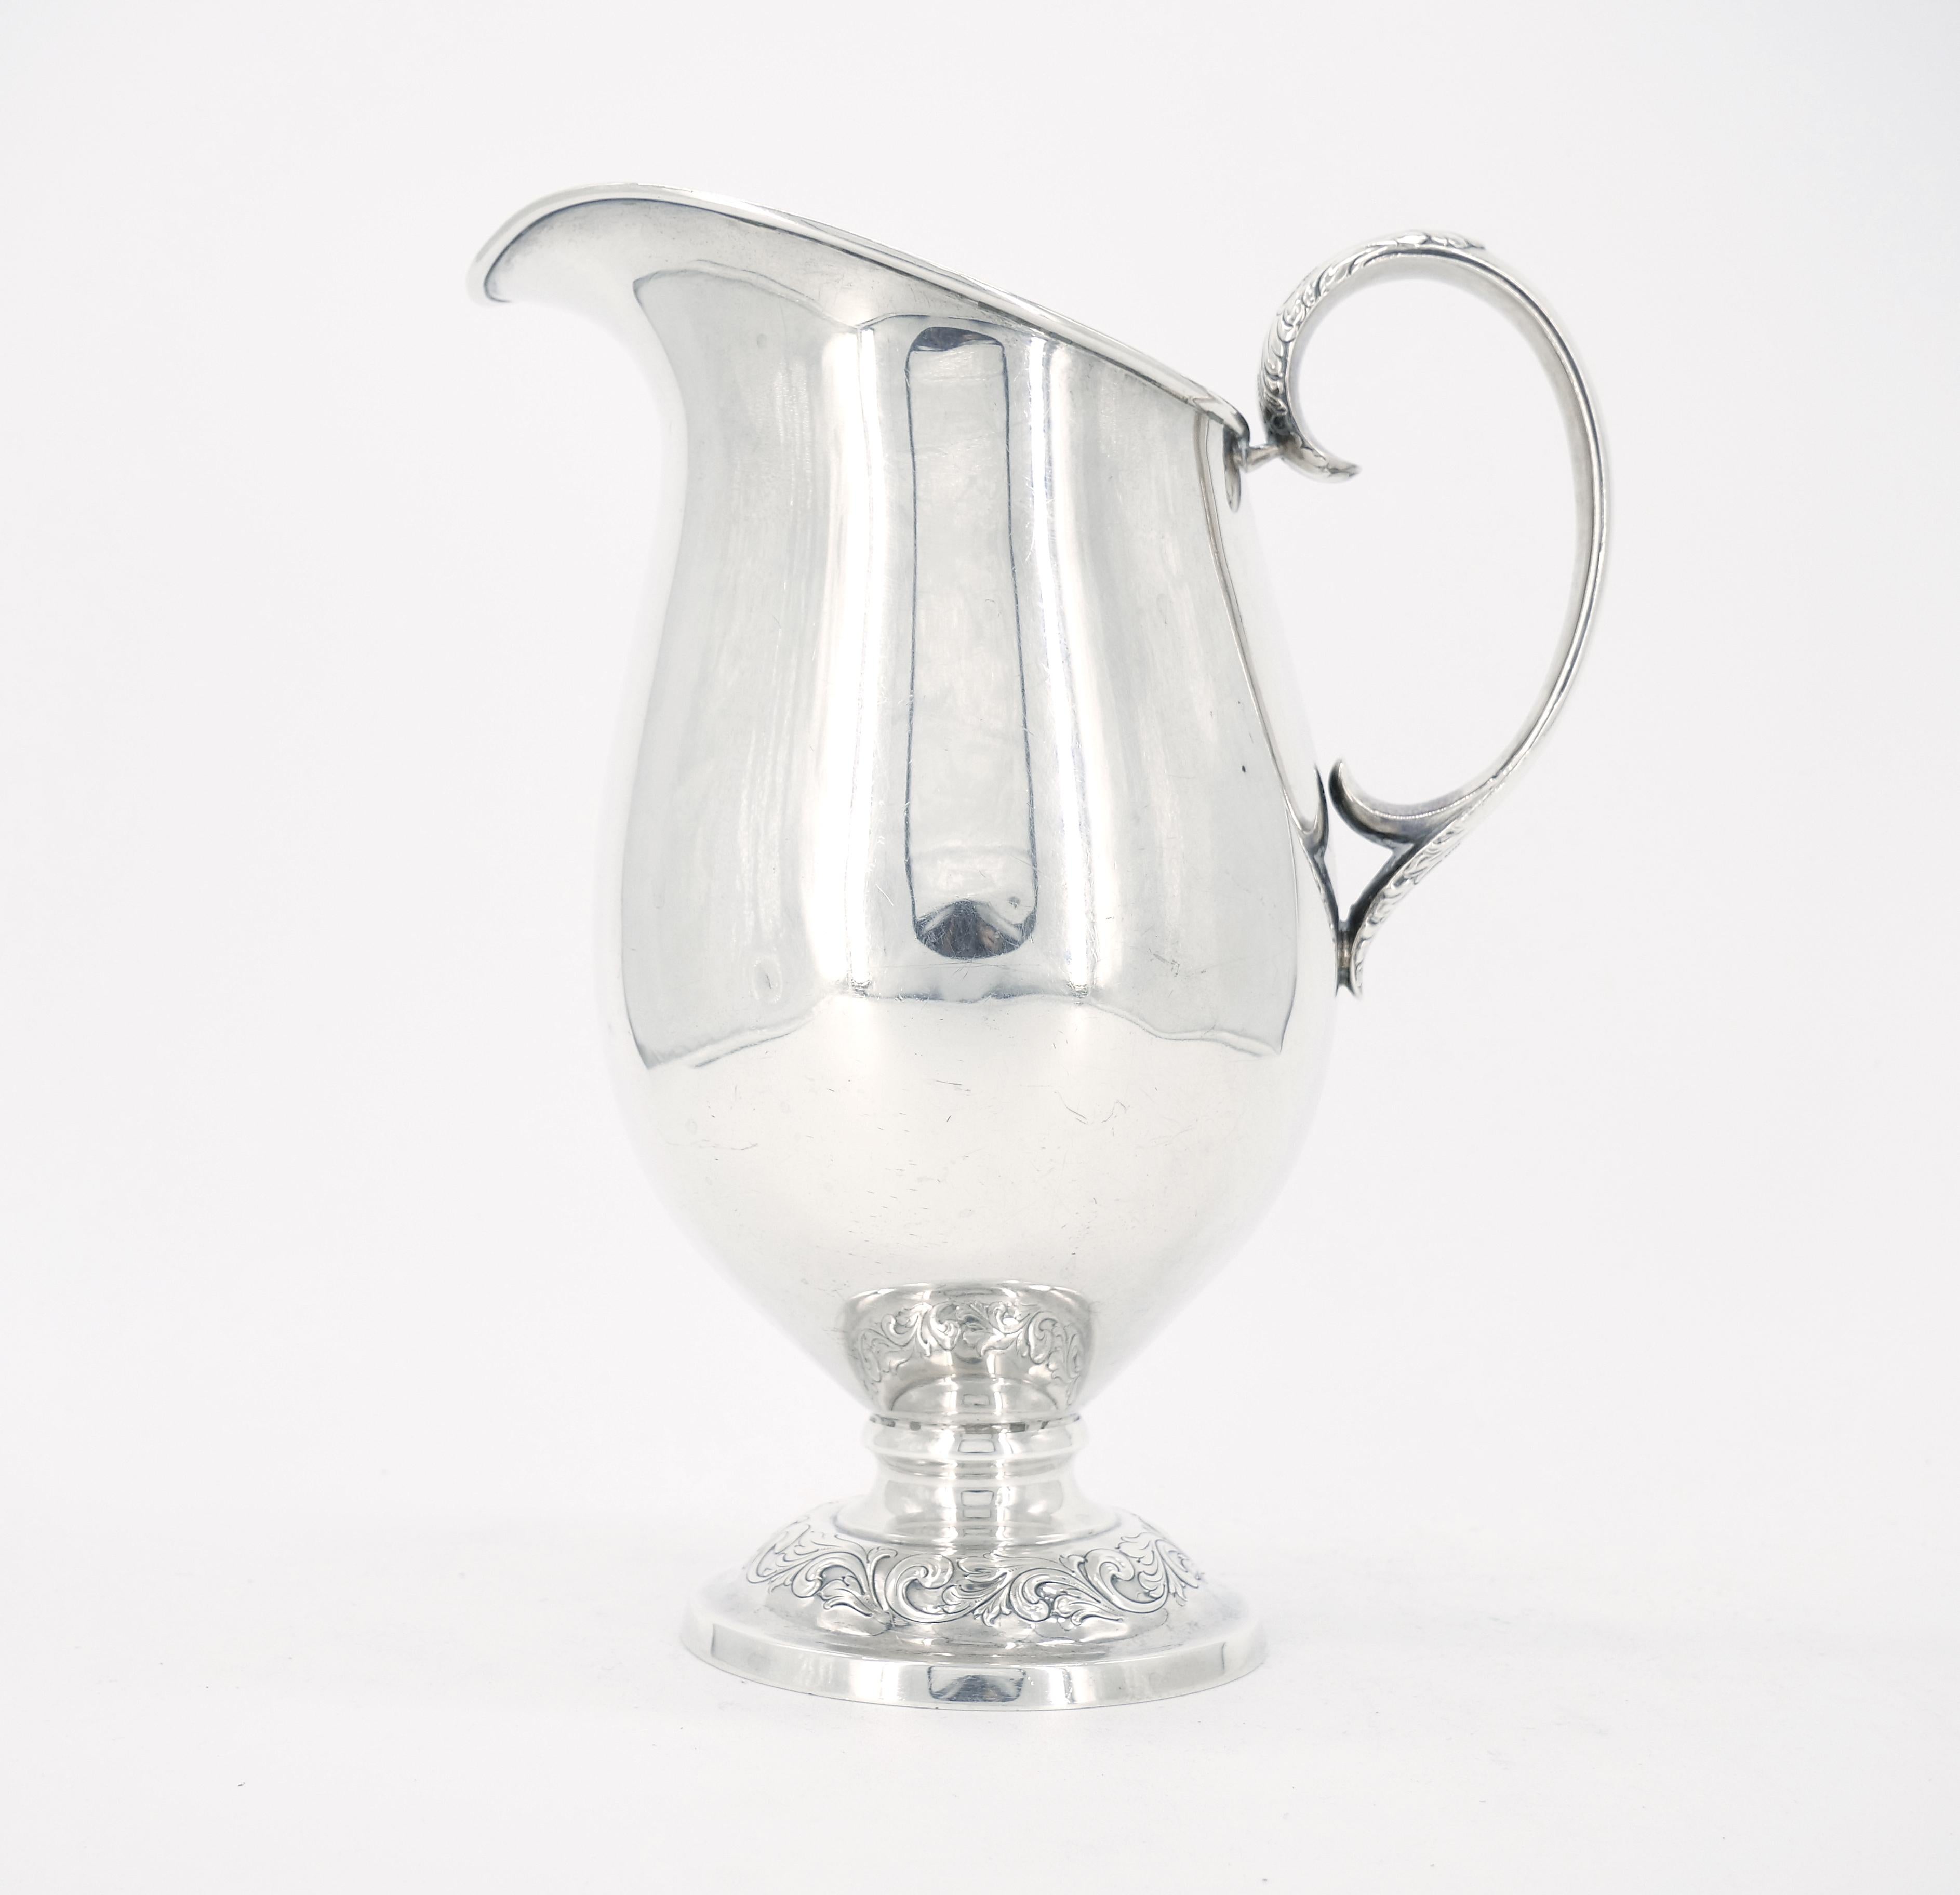 Lovely sterling silver barware water pitcher or jug from Towle with repousse and chased scrolling foliate motif on the foot and c-shaped handle with engraved acanthus motif.